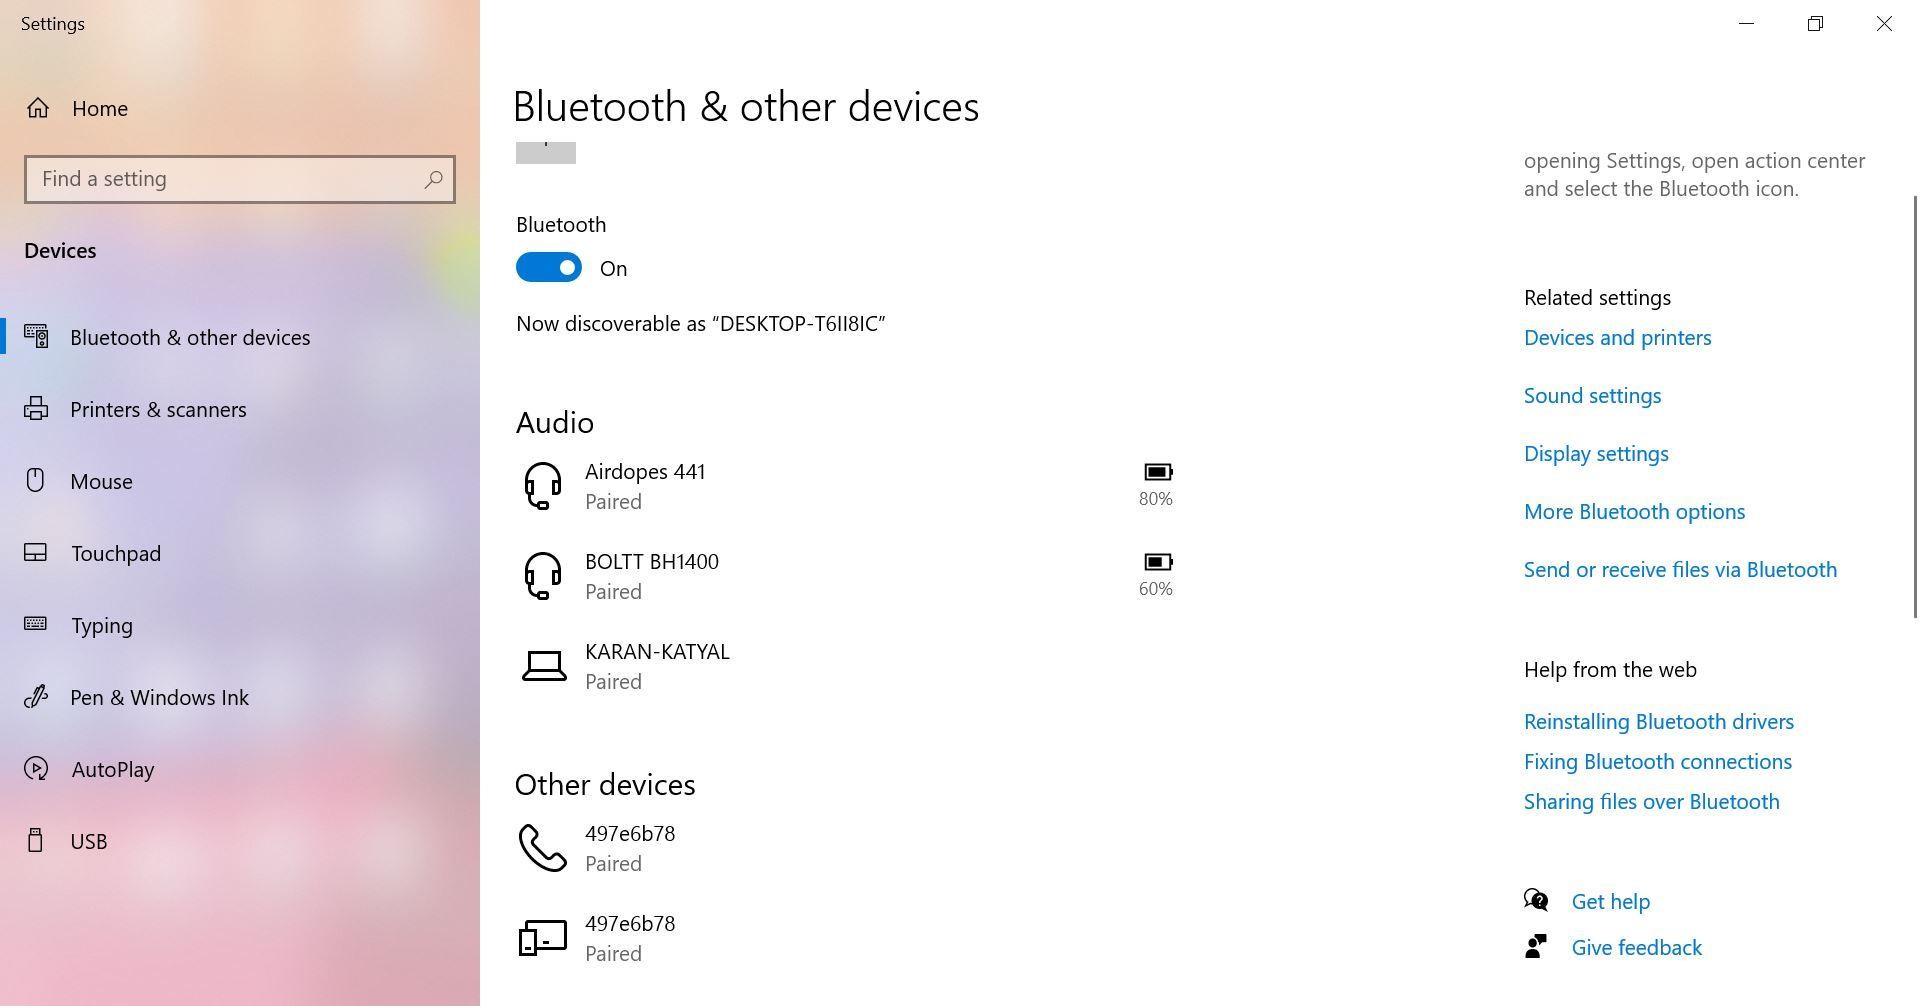 How Do I Transfer Files from Pc to Android Phone Via Bluetooth